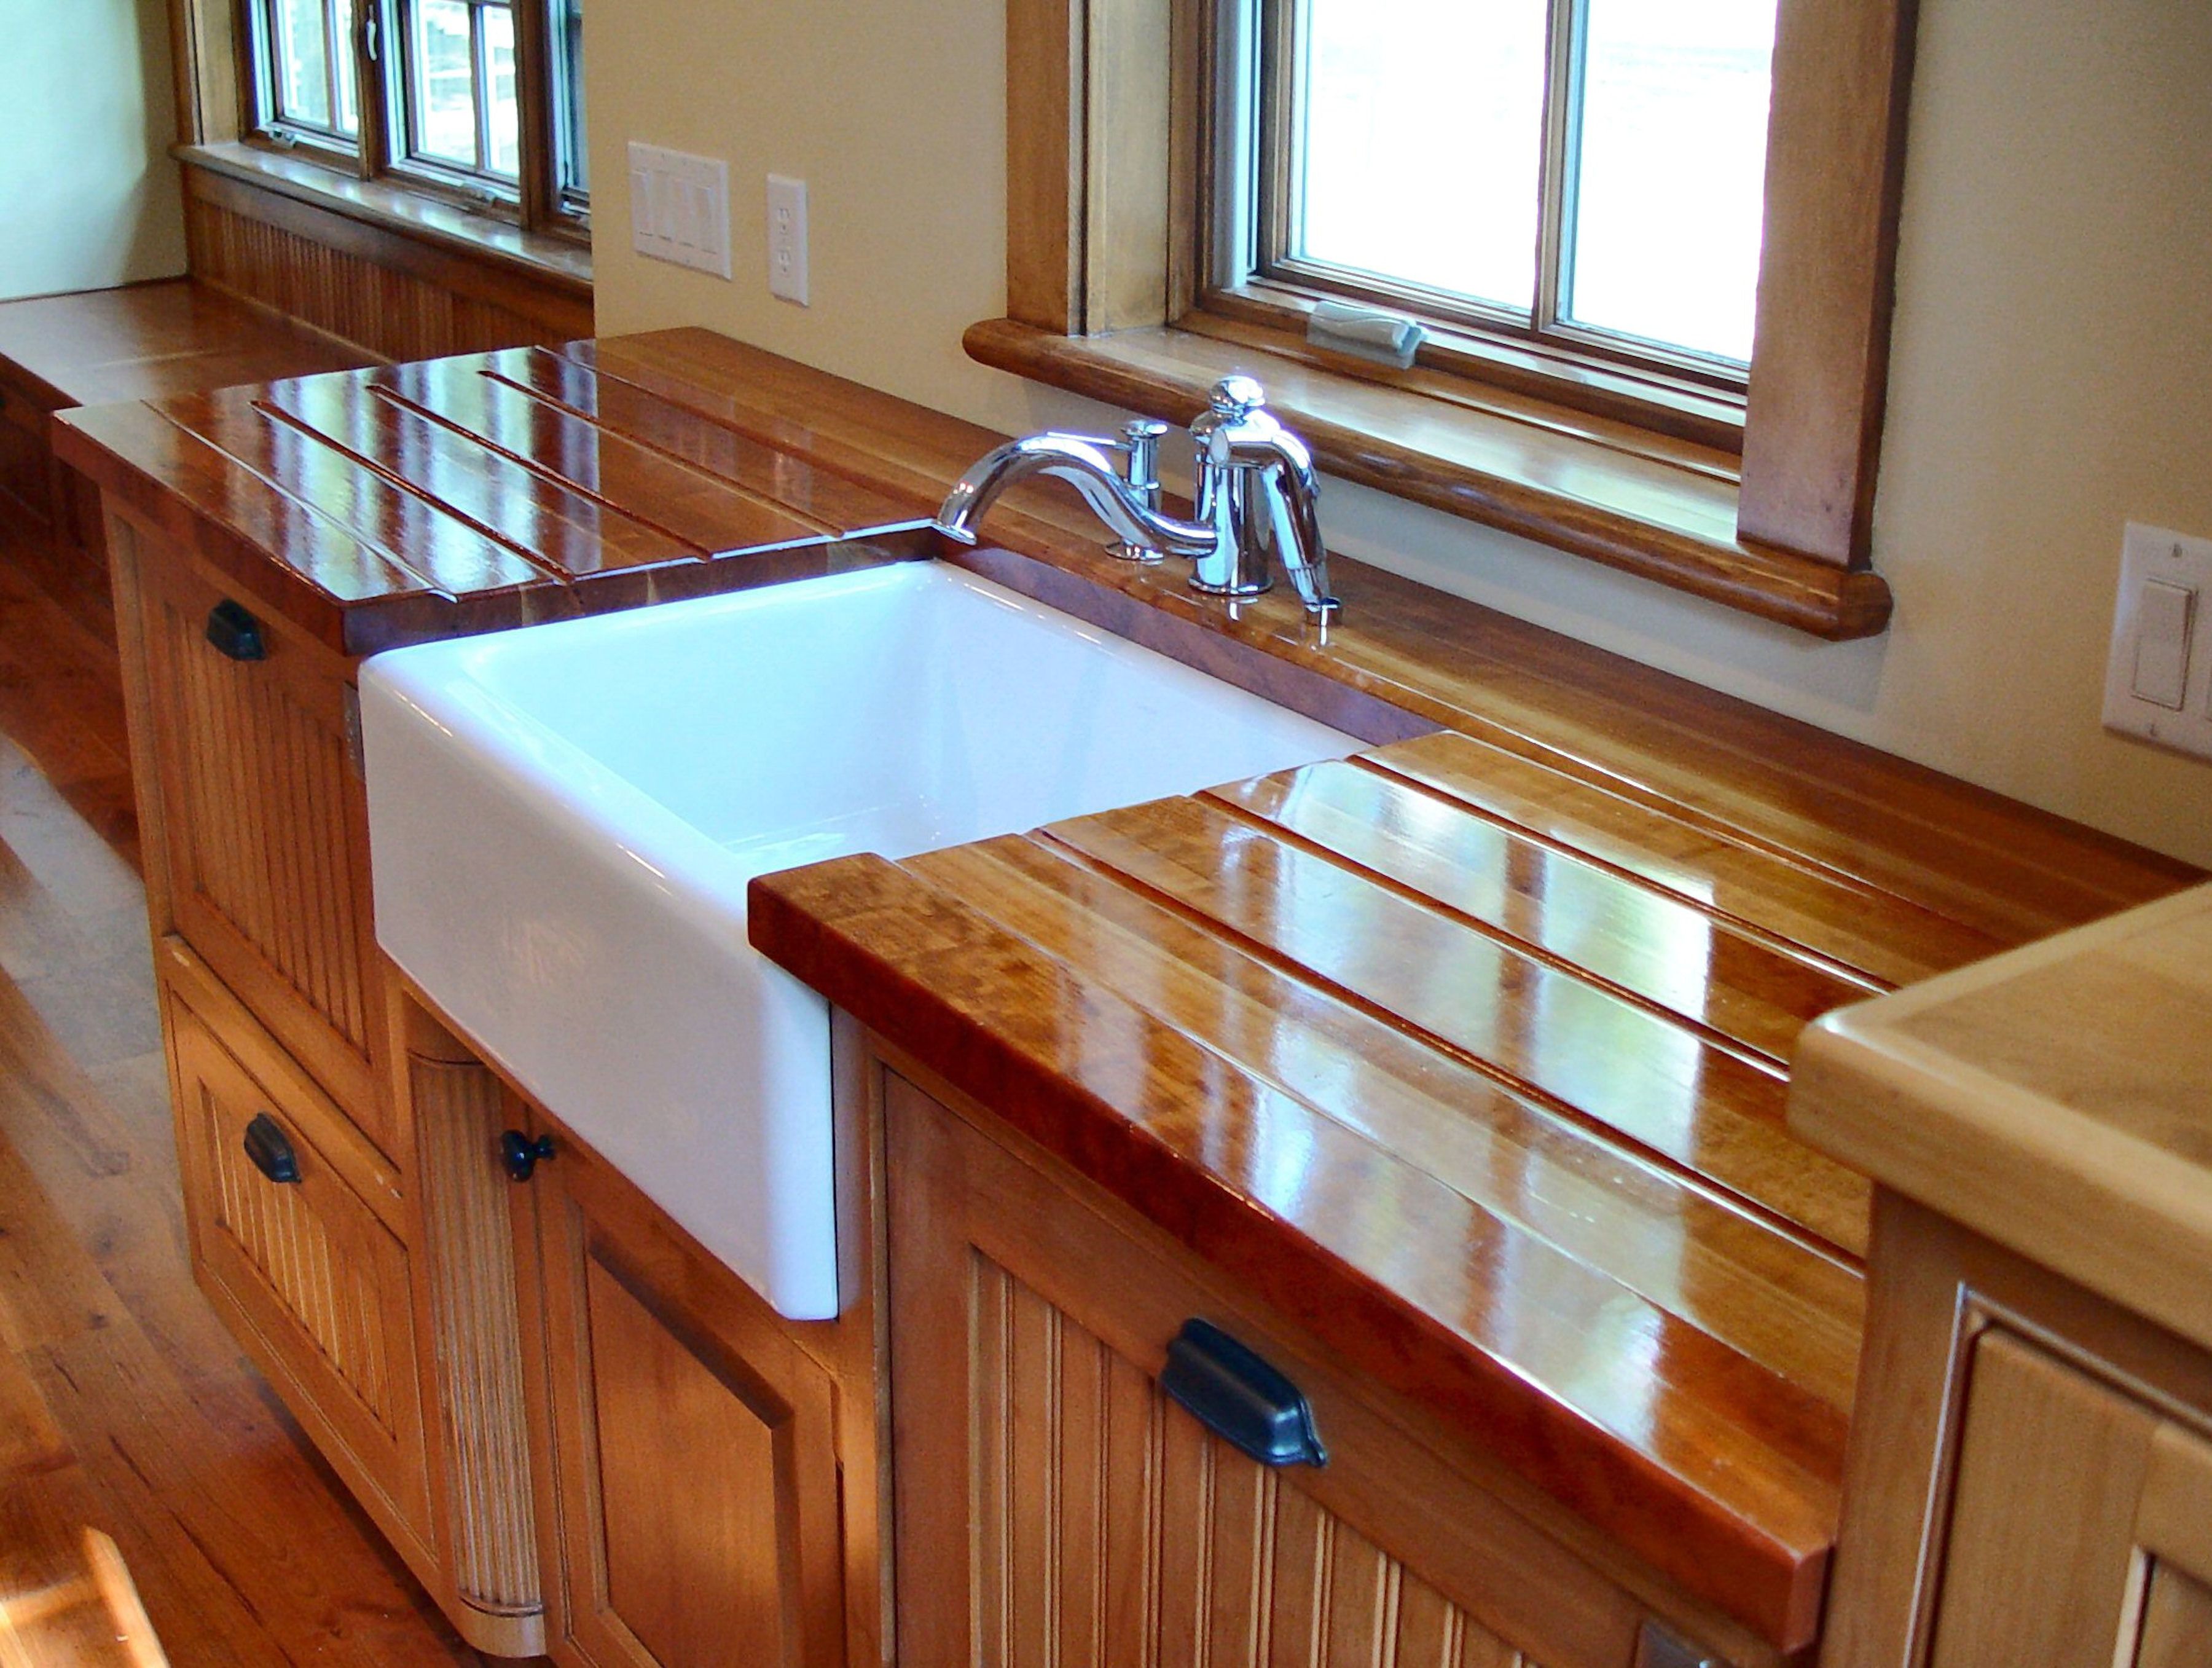 http://www.devoswoodworking.com/images/dcw/photo-gallery/wood-countertops/wood-countertops-cherry-photos/cherry-wood-countertops-img003.jpg